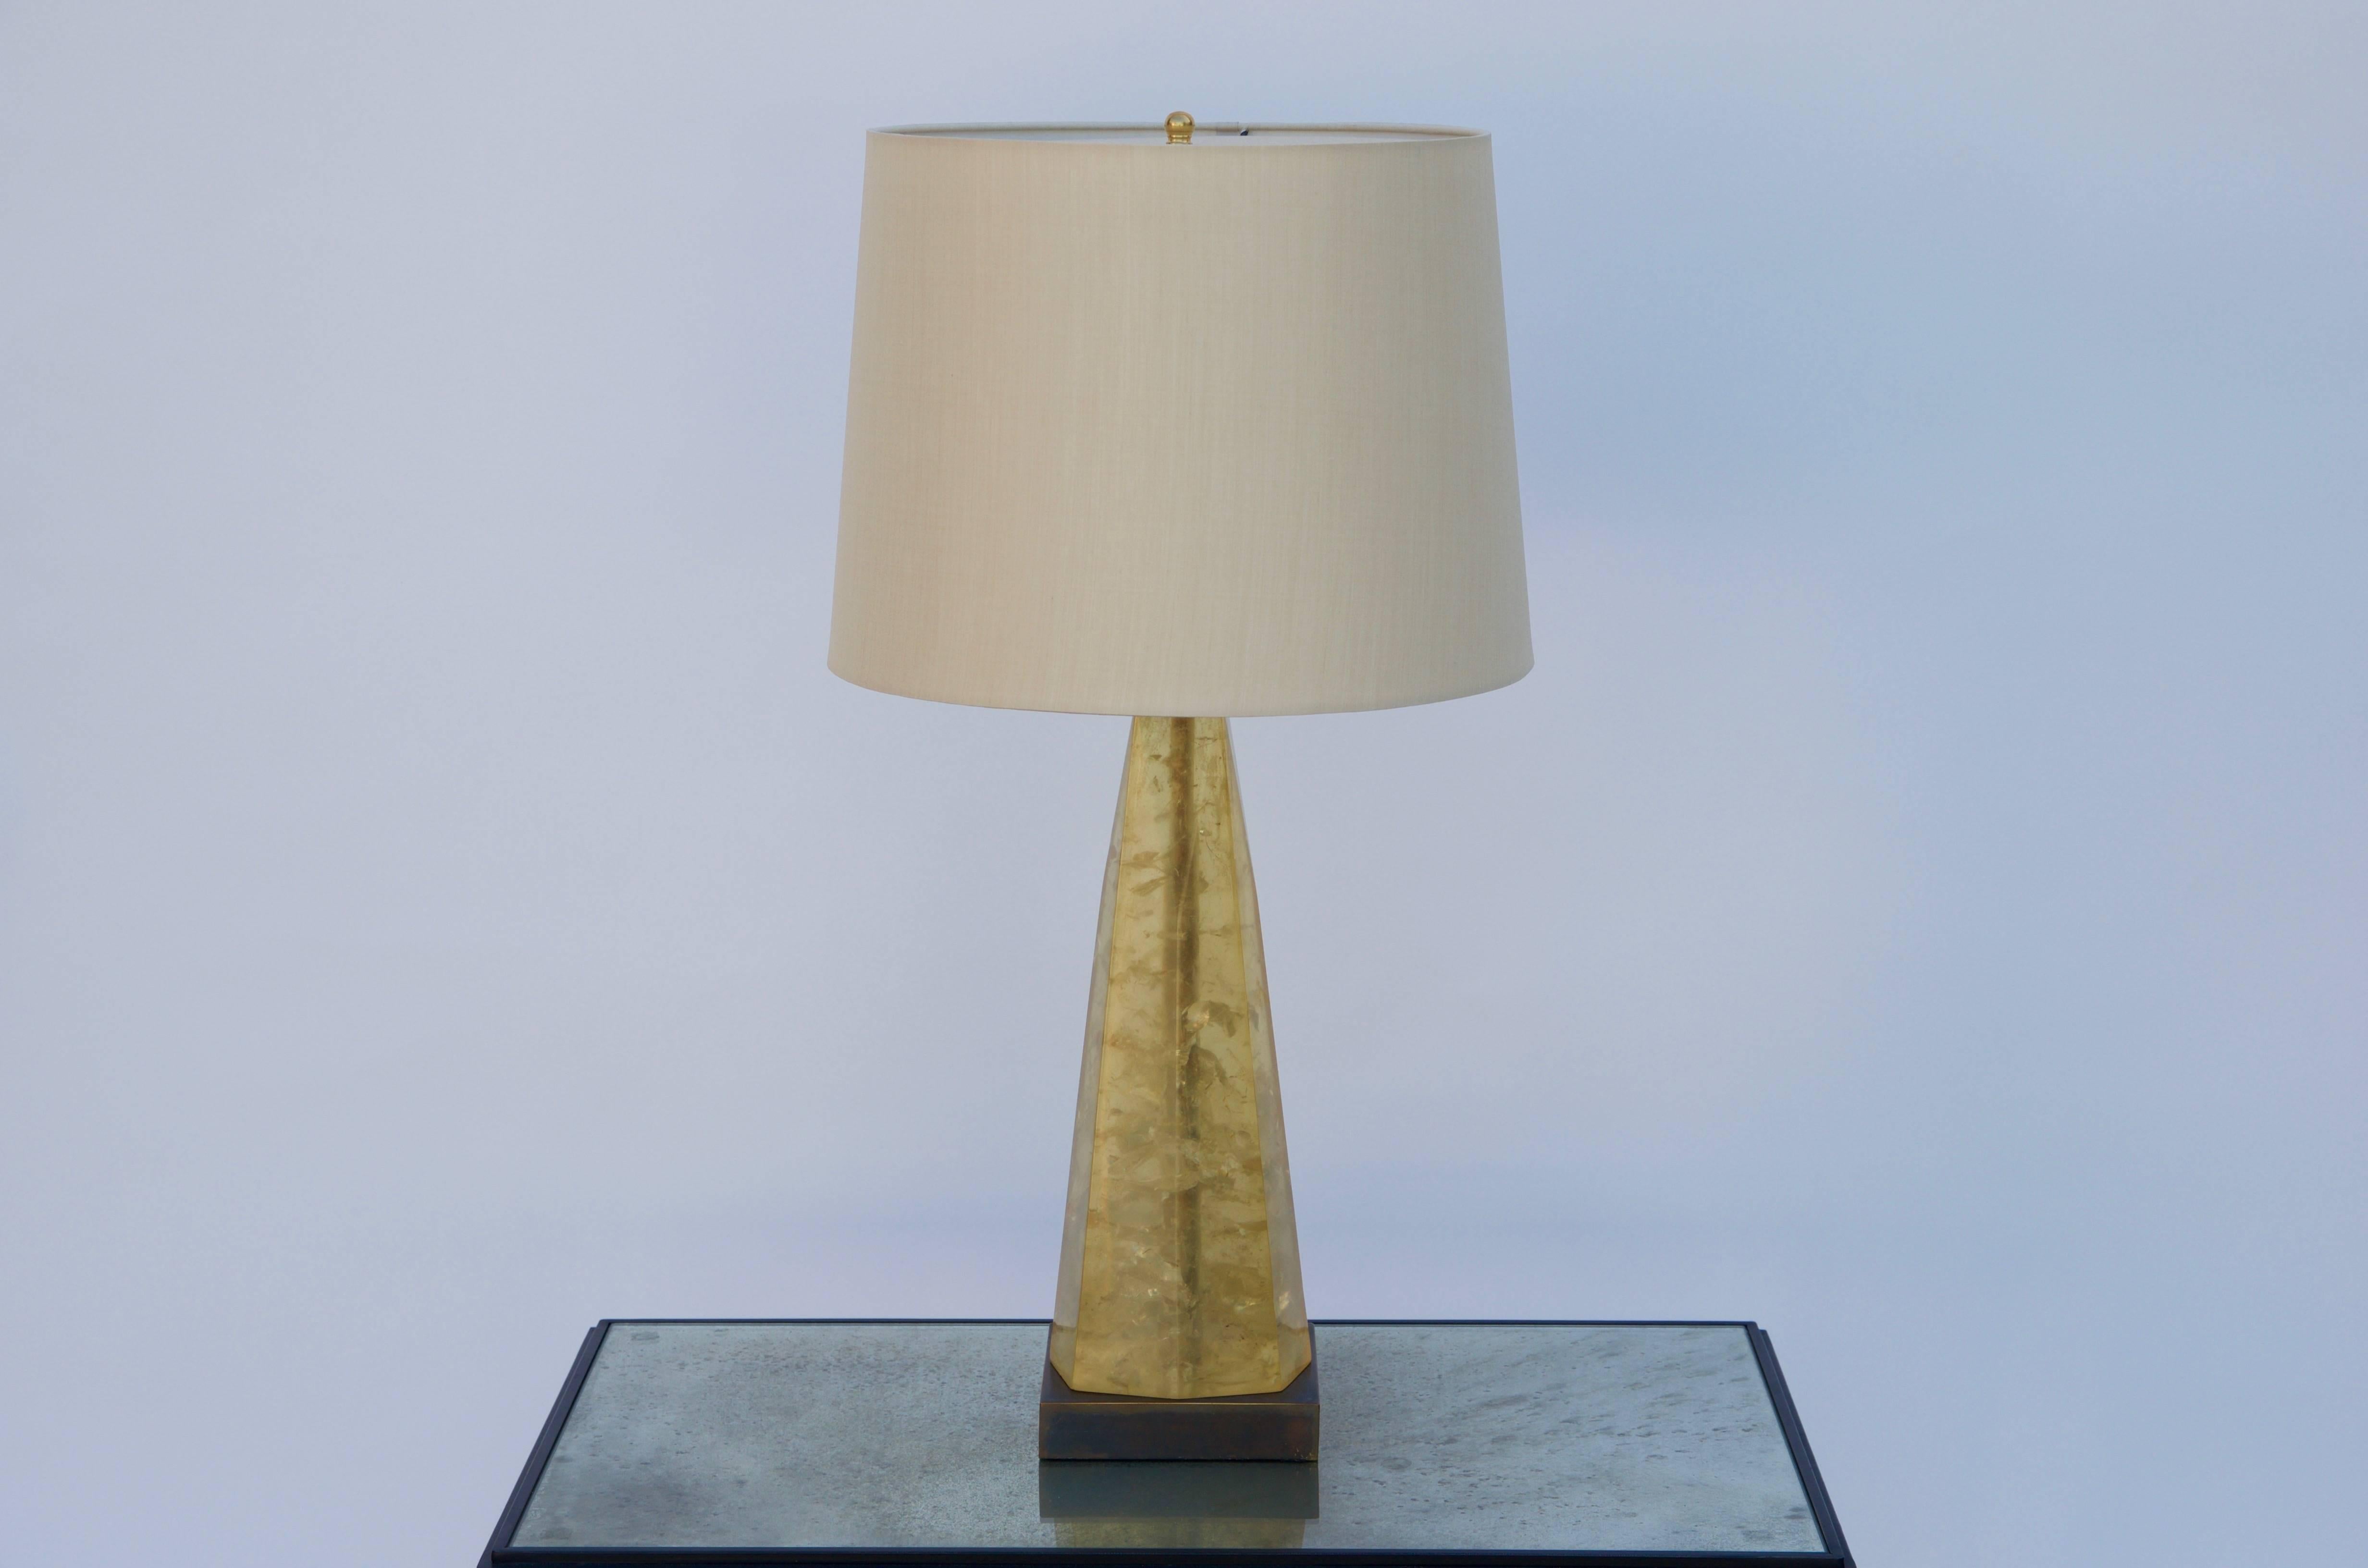 Fractal resin lamp in the style of Marie-Claude de Fouquières, circa 1975. Obelisk shaped fractal resin column over a patinated brass base. Rewired with custom cream silk shade and matching top diffuser. Very chic lamp.

Shade measurement: 14'